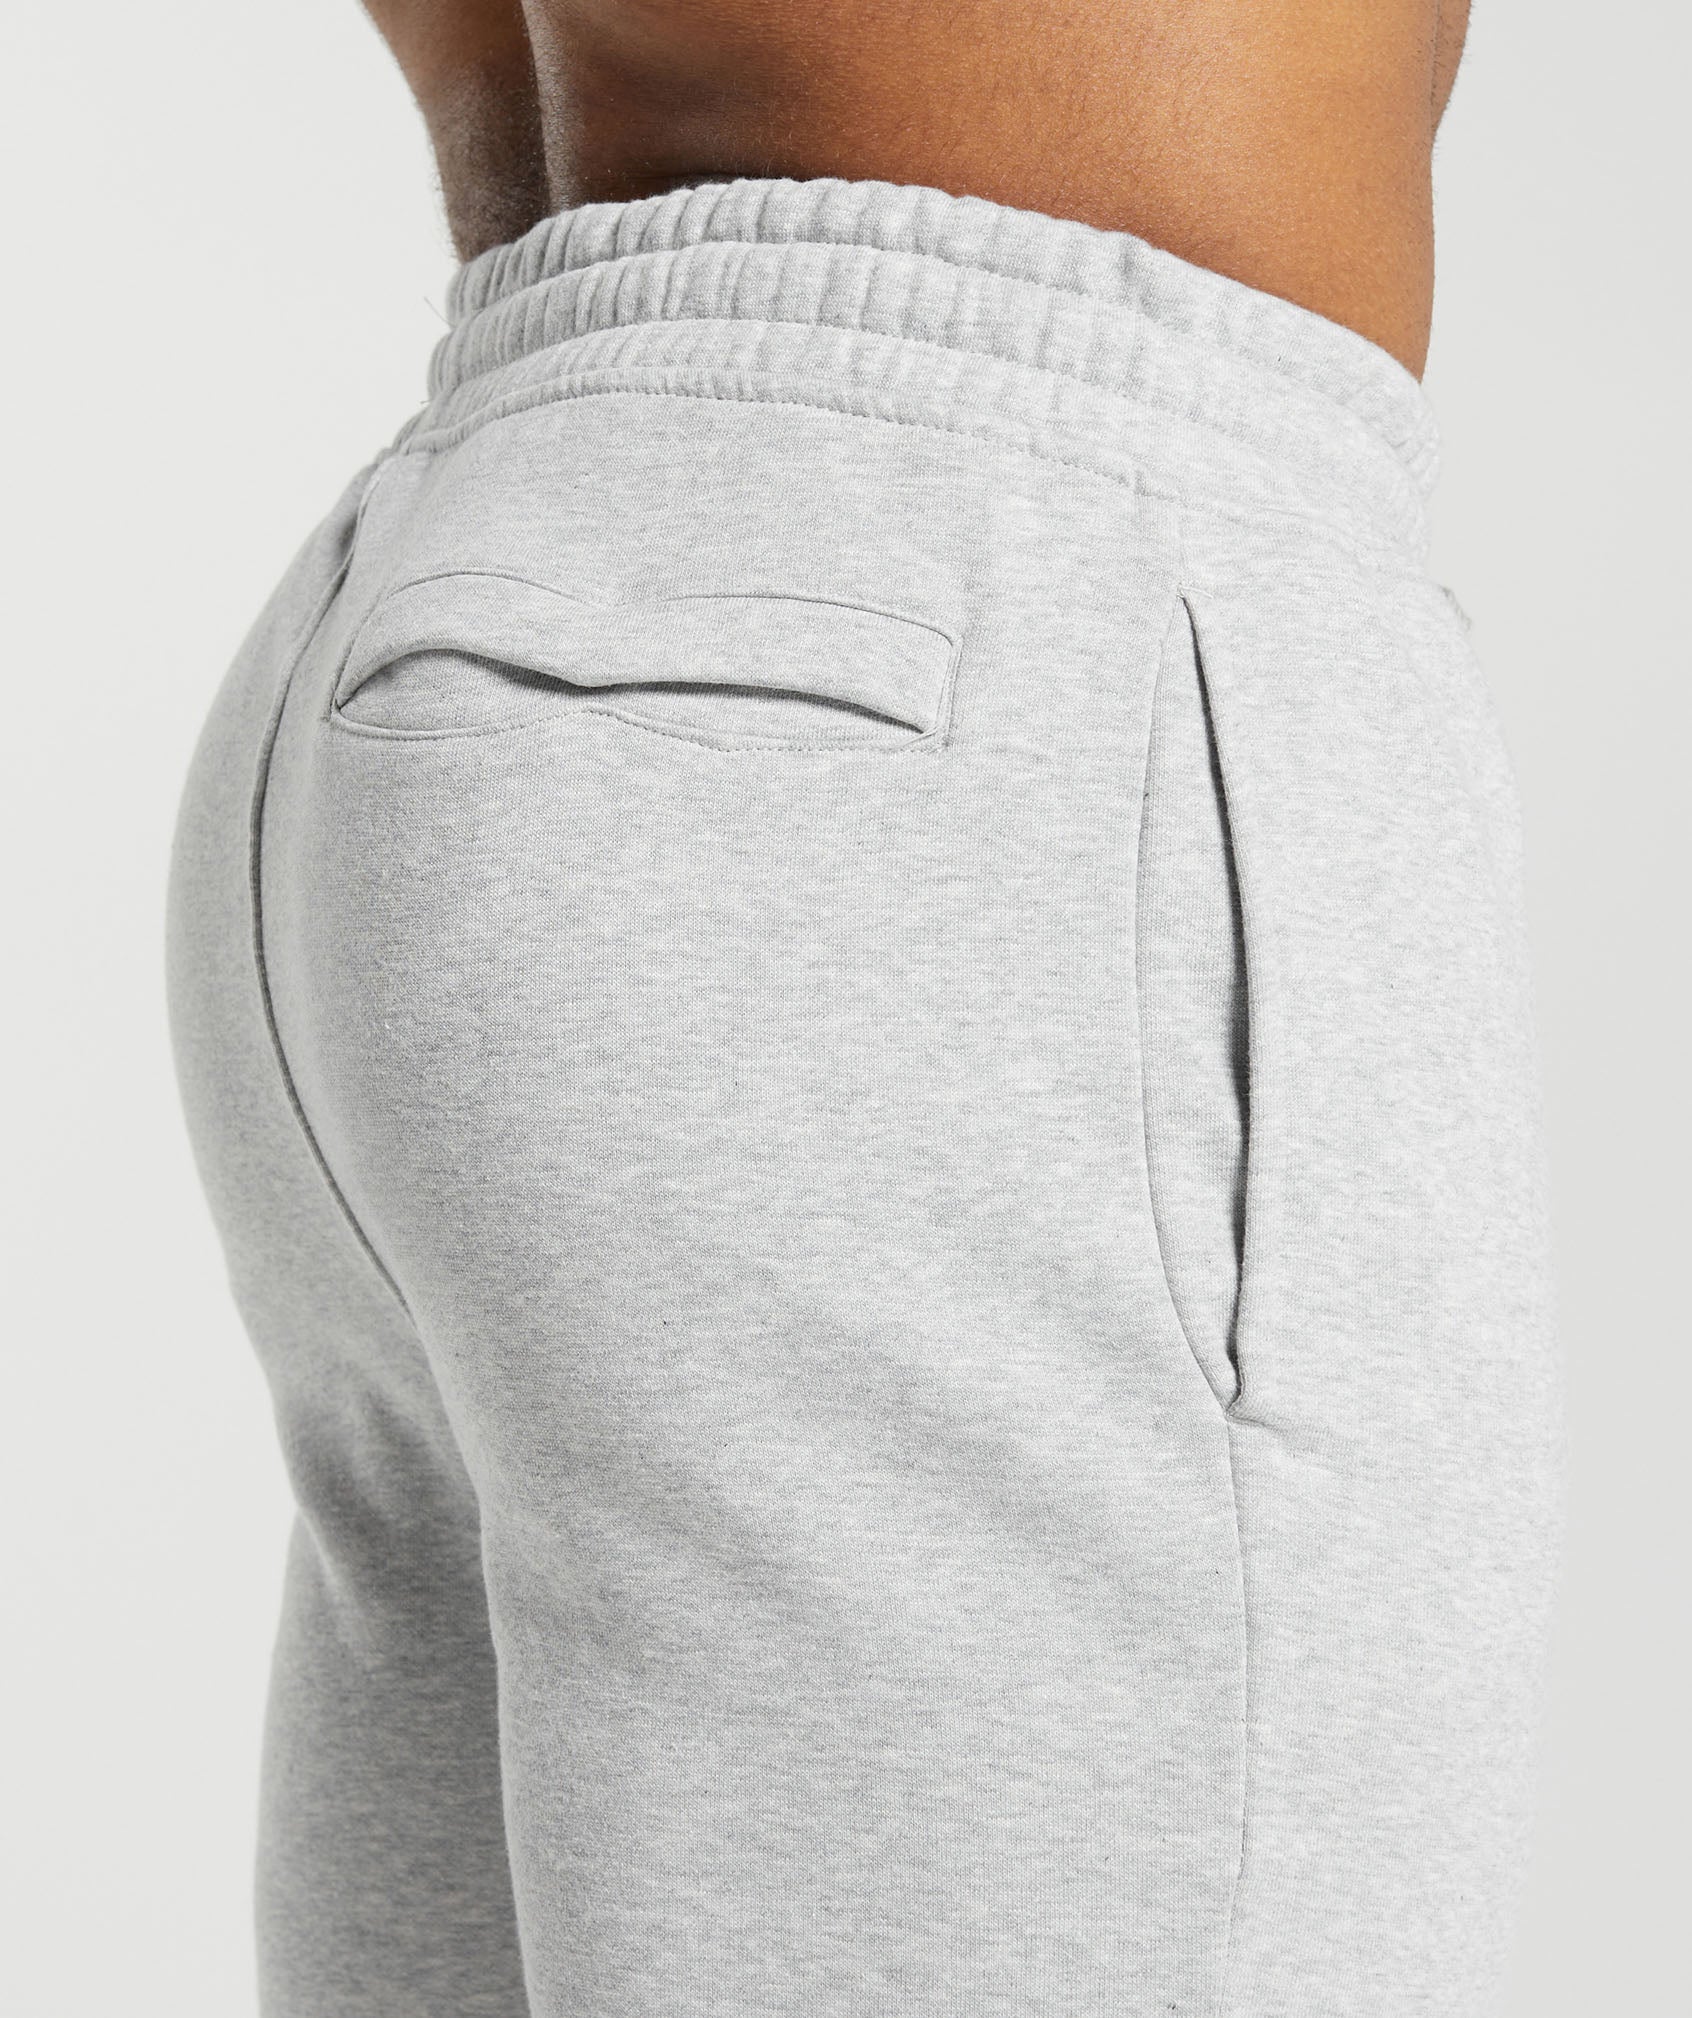 Crest Joggers in Light Grey Marl - view 5